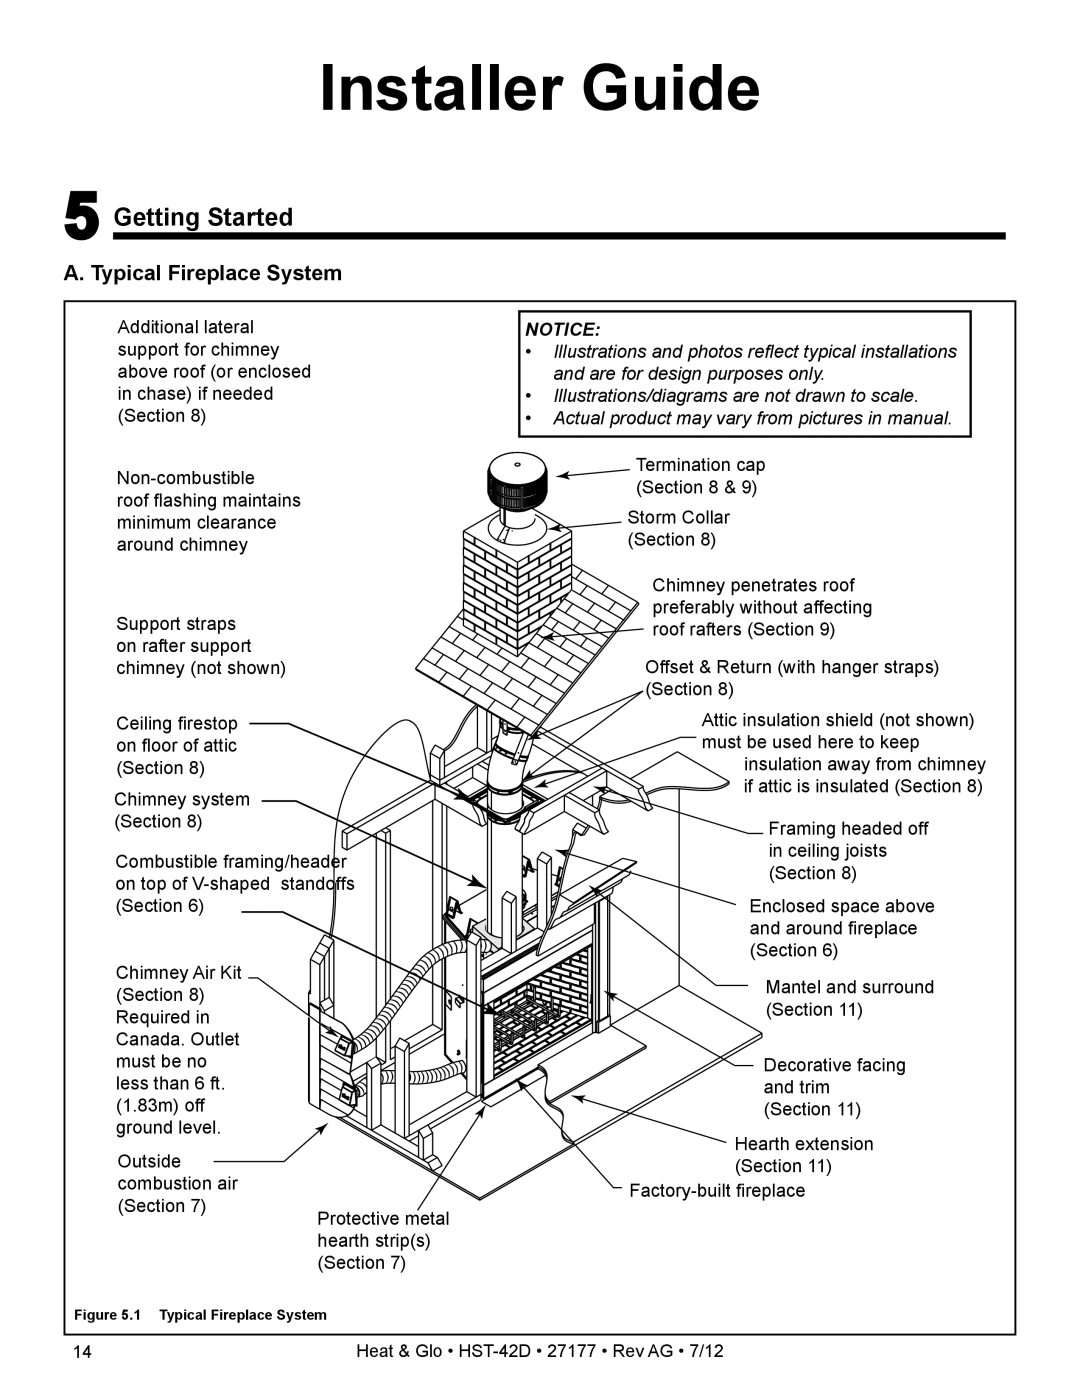 Heat & Glo LifeStyle HST-42D owner manual Installer Guide, 5Getting Started, A. Typical Fireplace System 